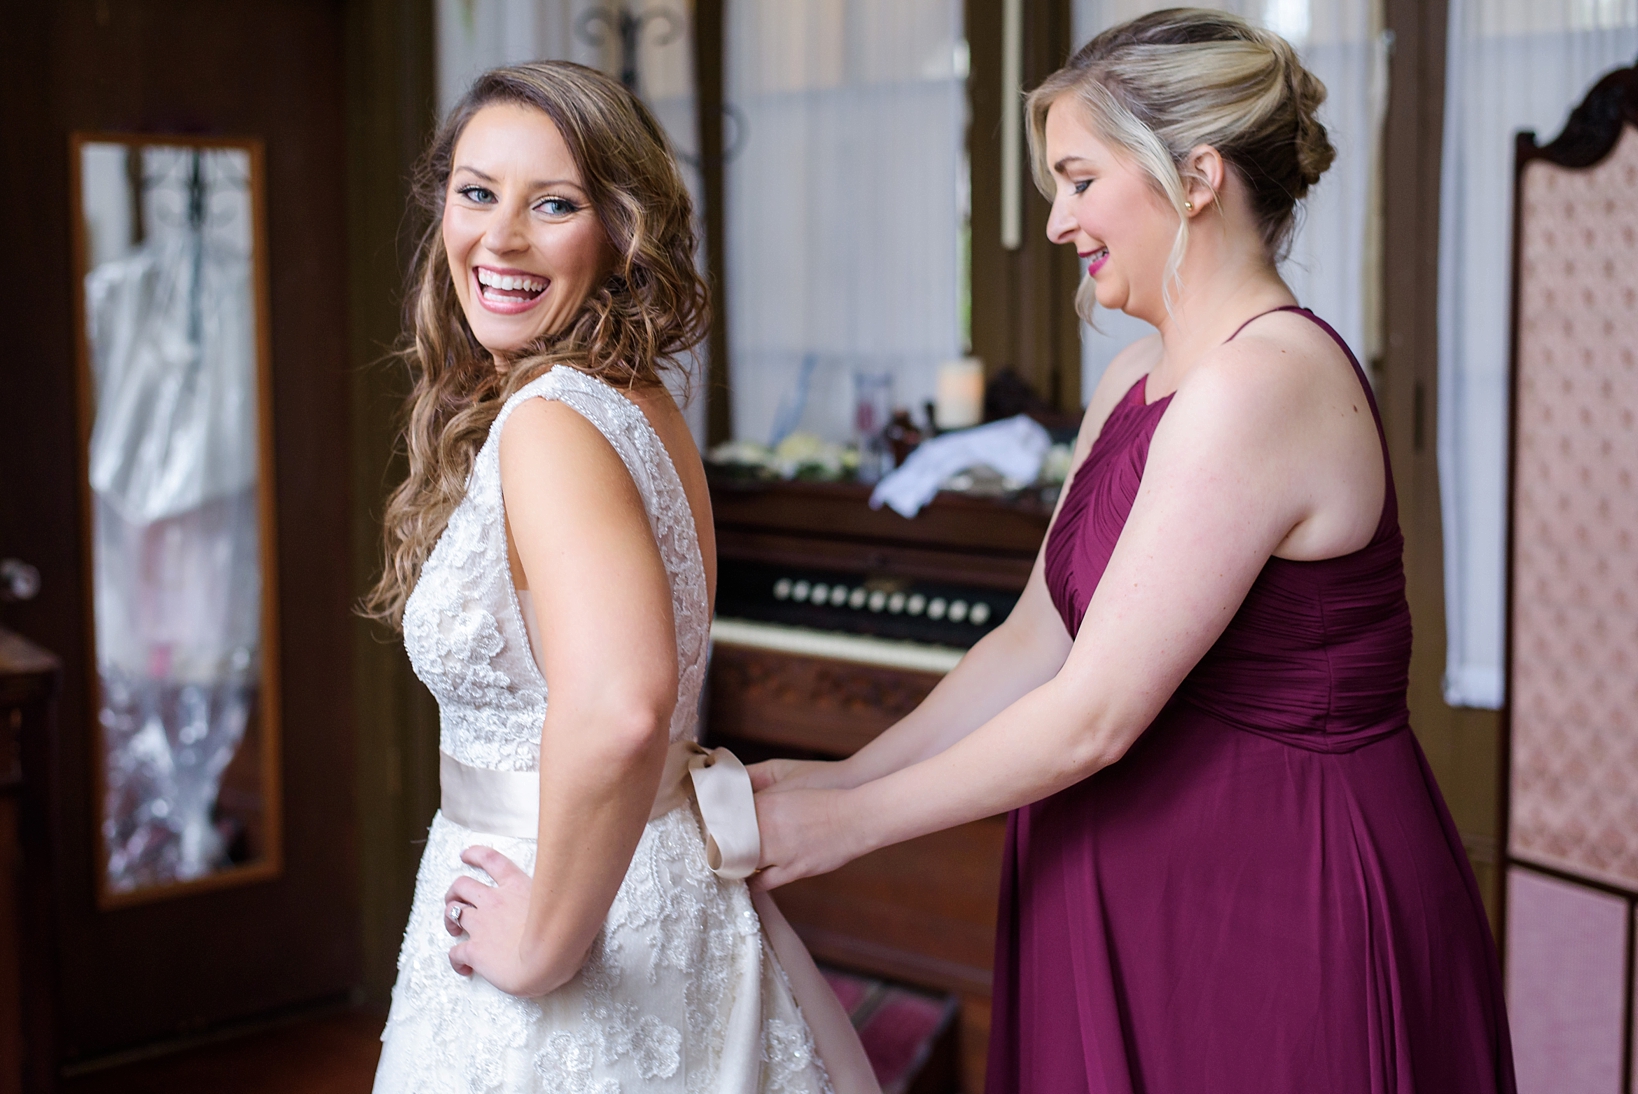 Bride laughs as her bridesmaid helps with some finishing touches of tying a bow